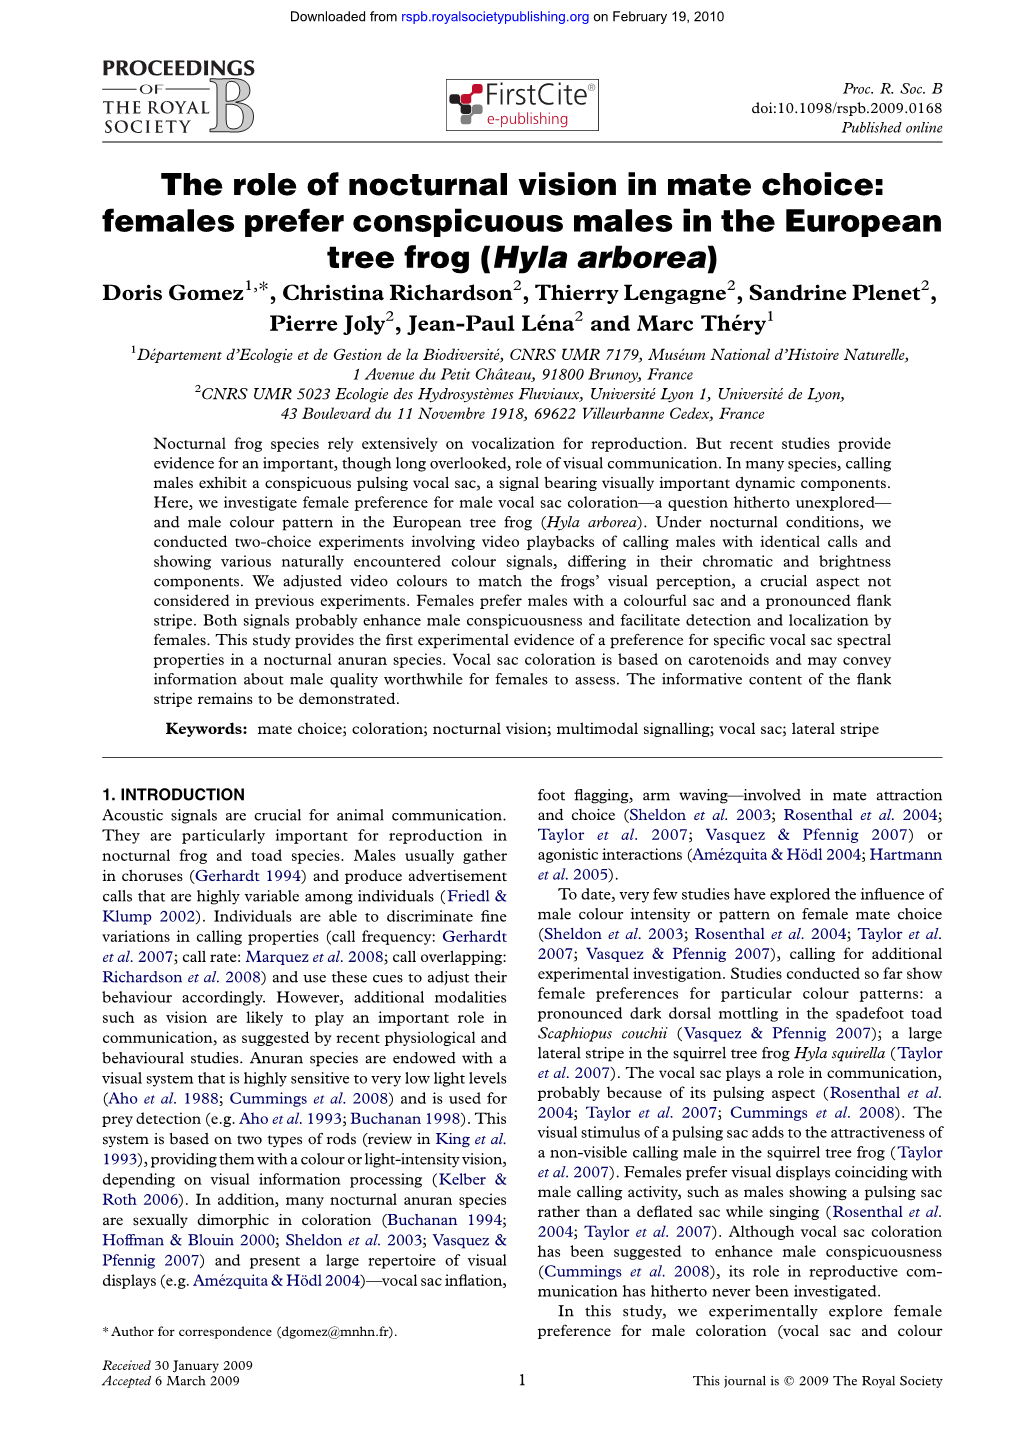 Females Prefer Conspicuous Males in the European Tree Frog (Hyla Arborea)